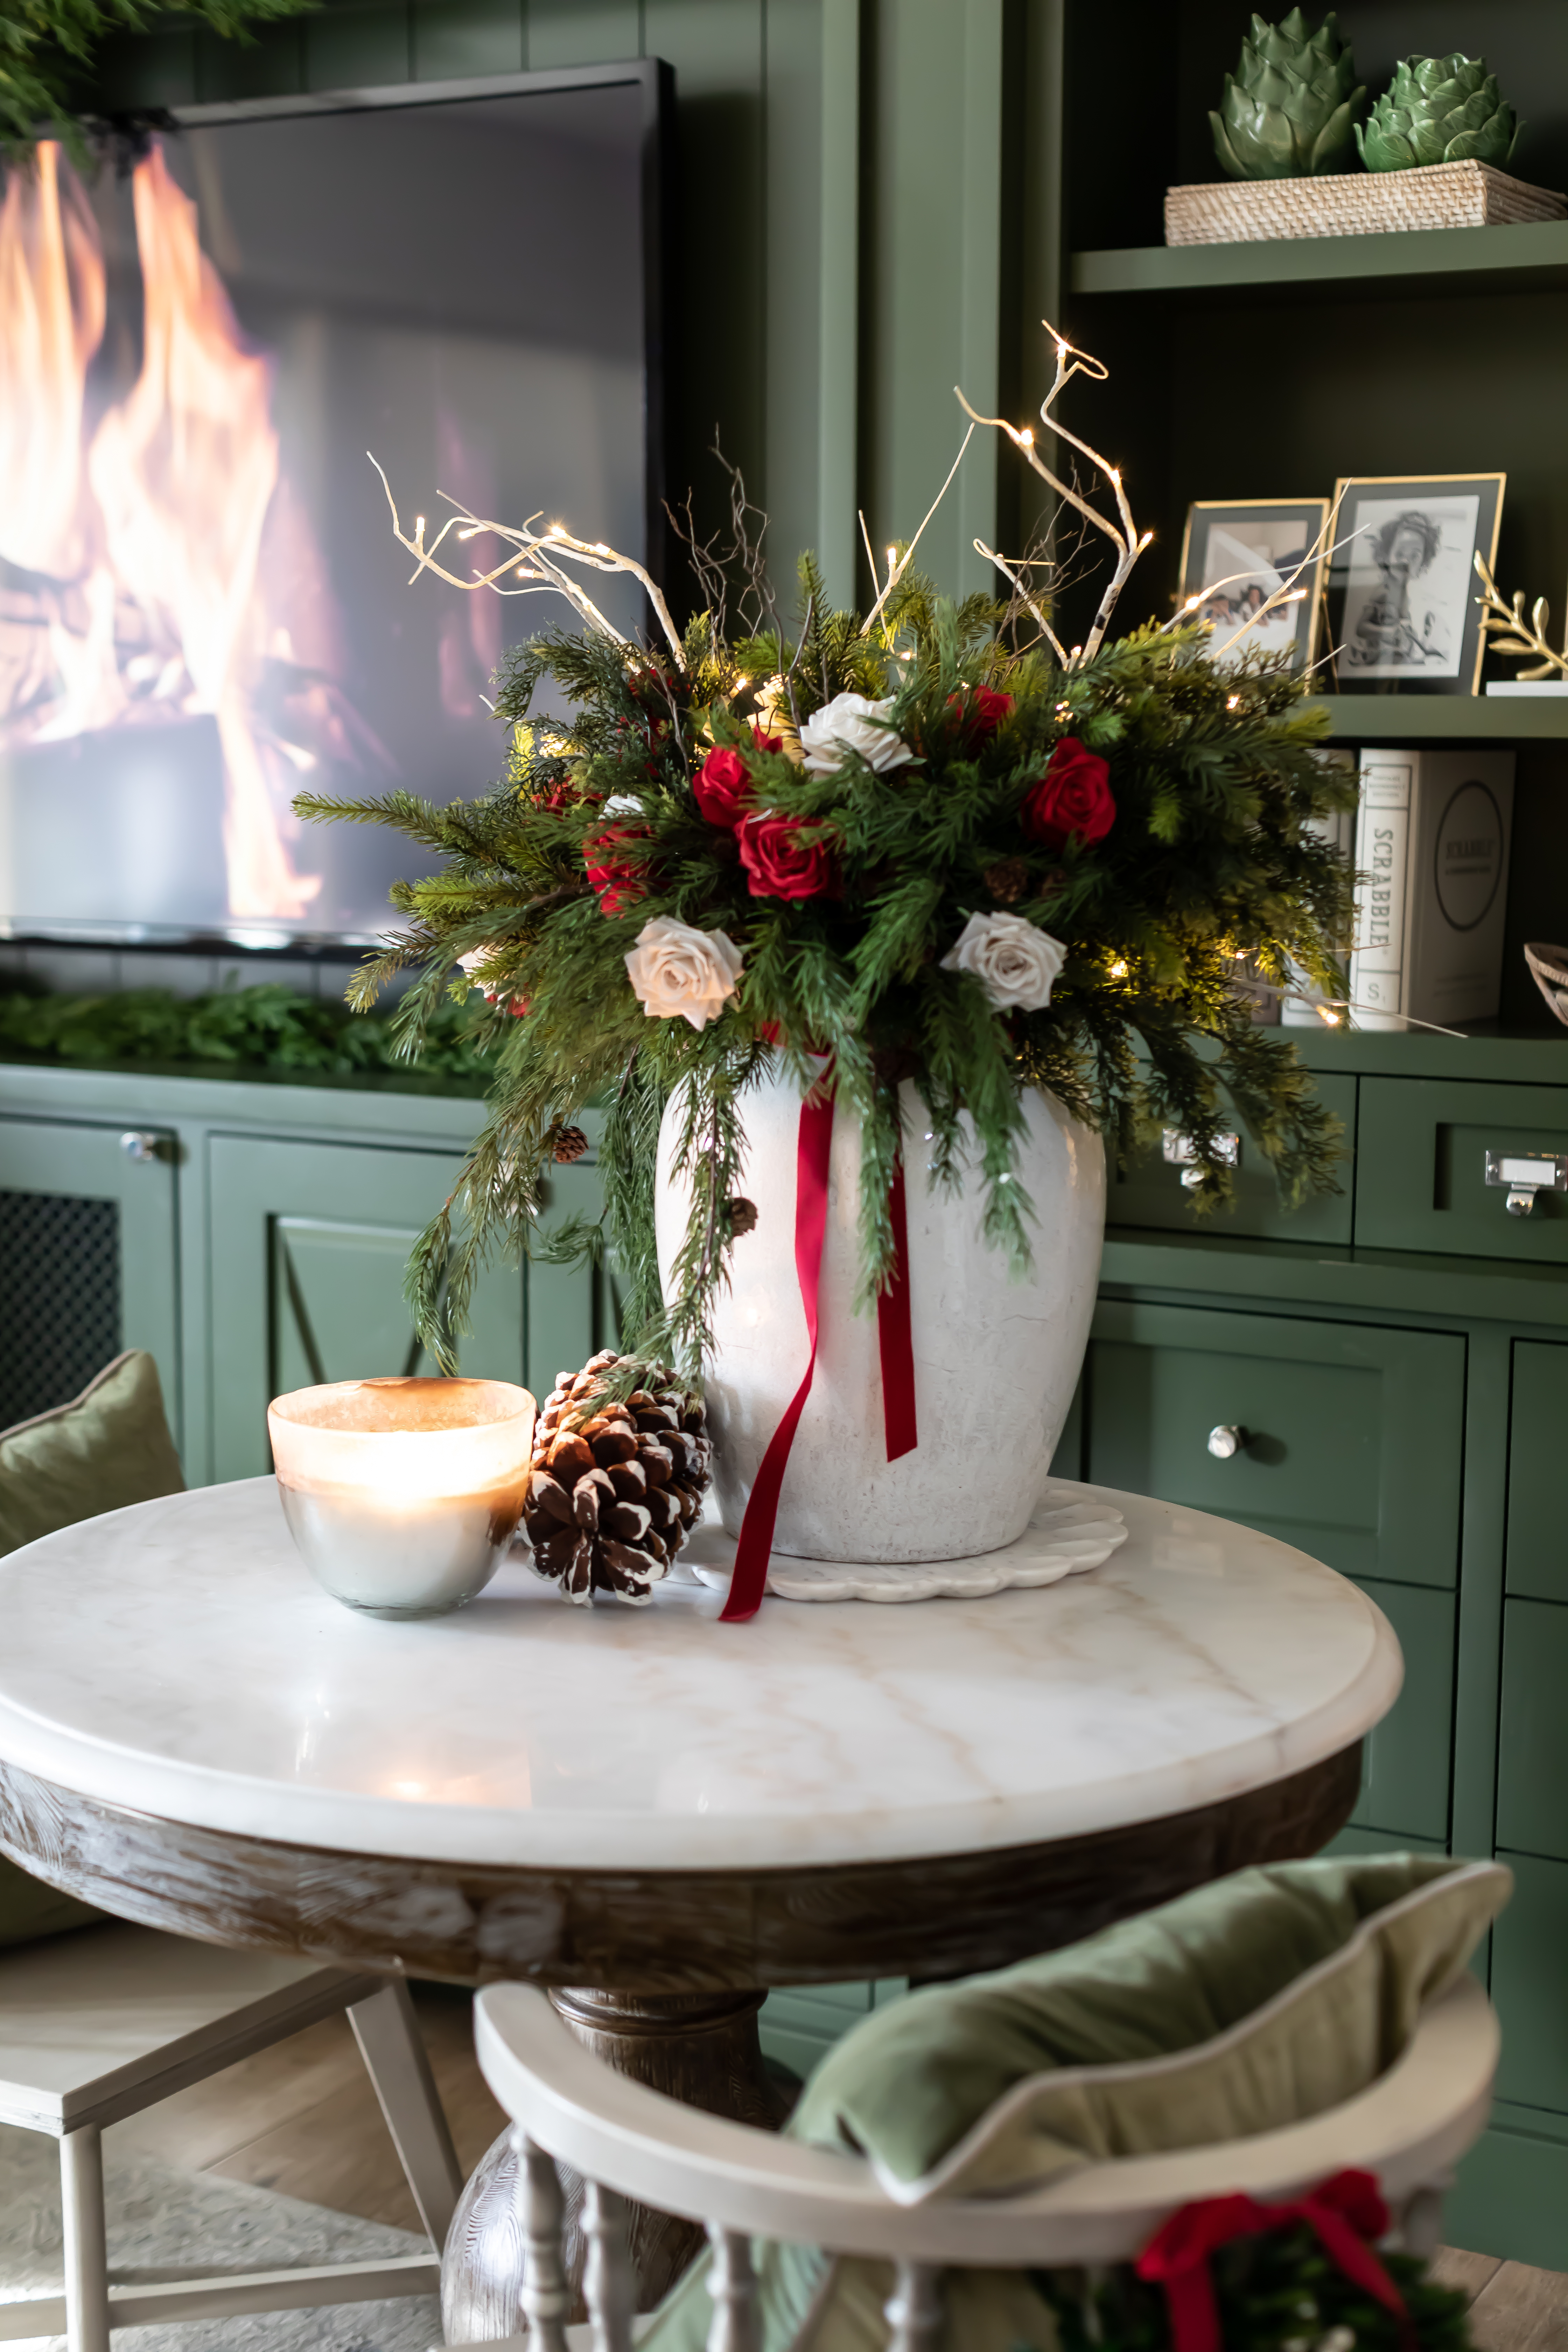 Arhaus round marble table with red Christmas decor. 